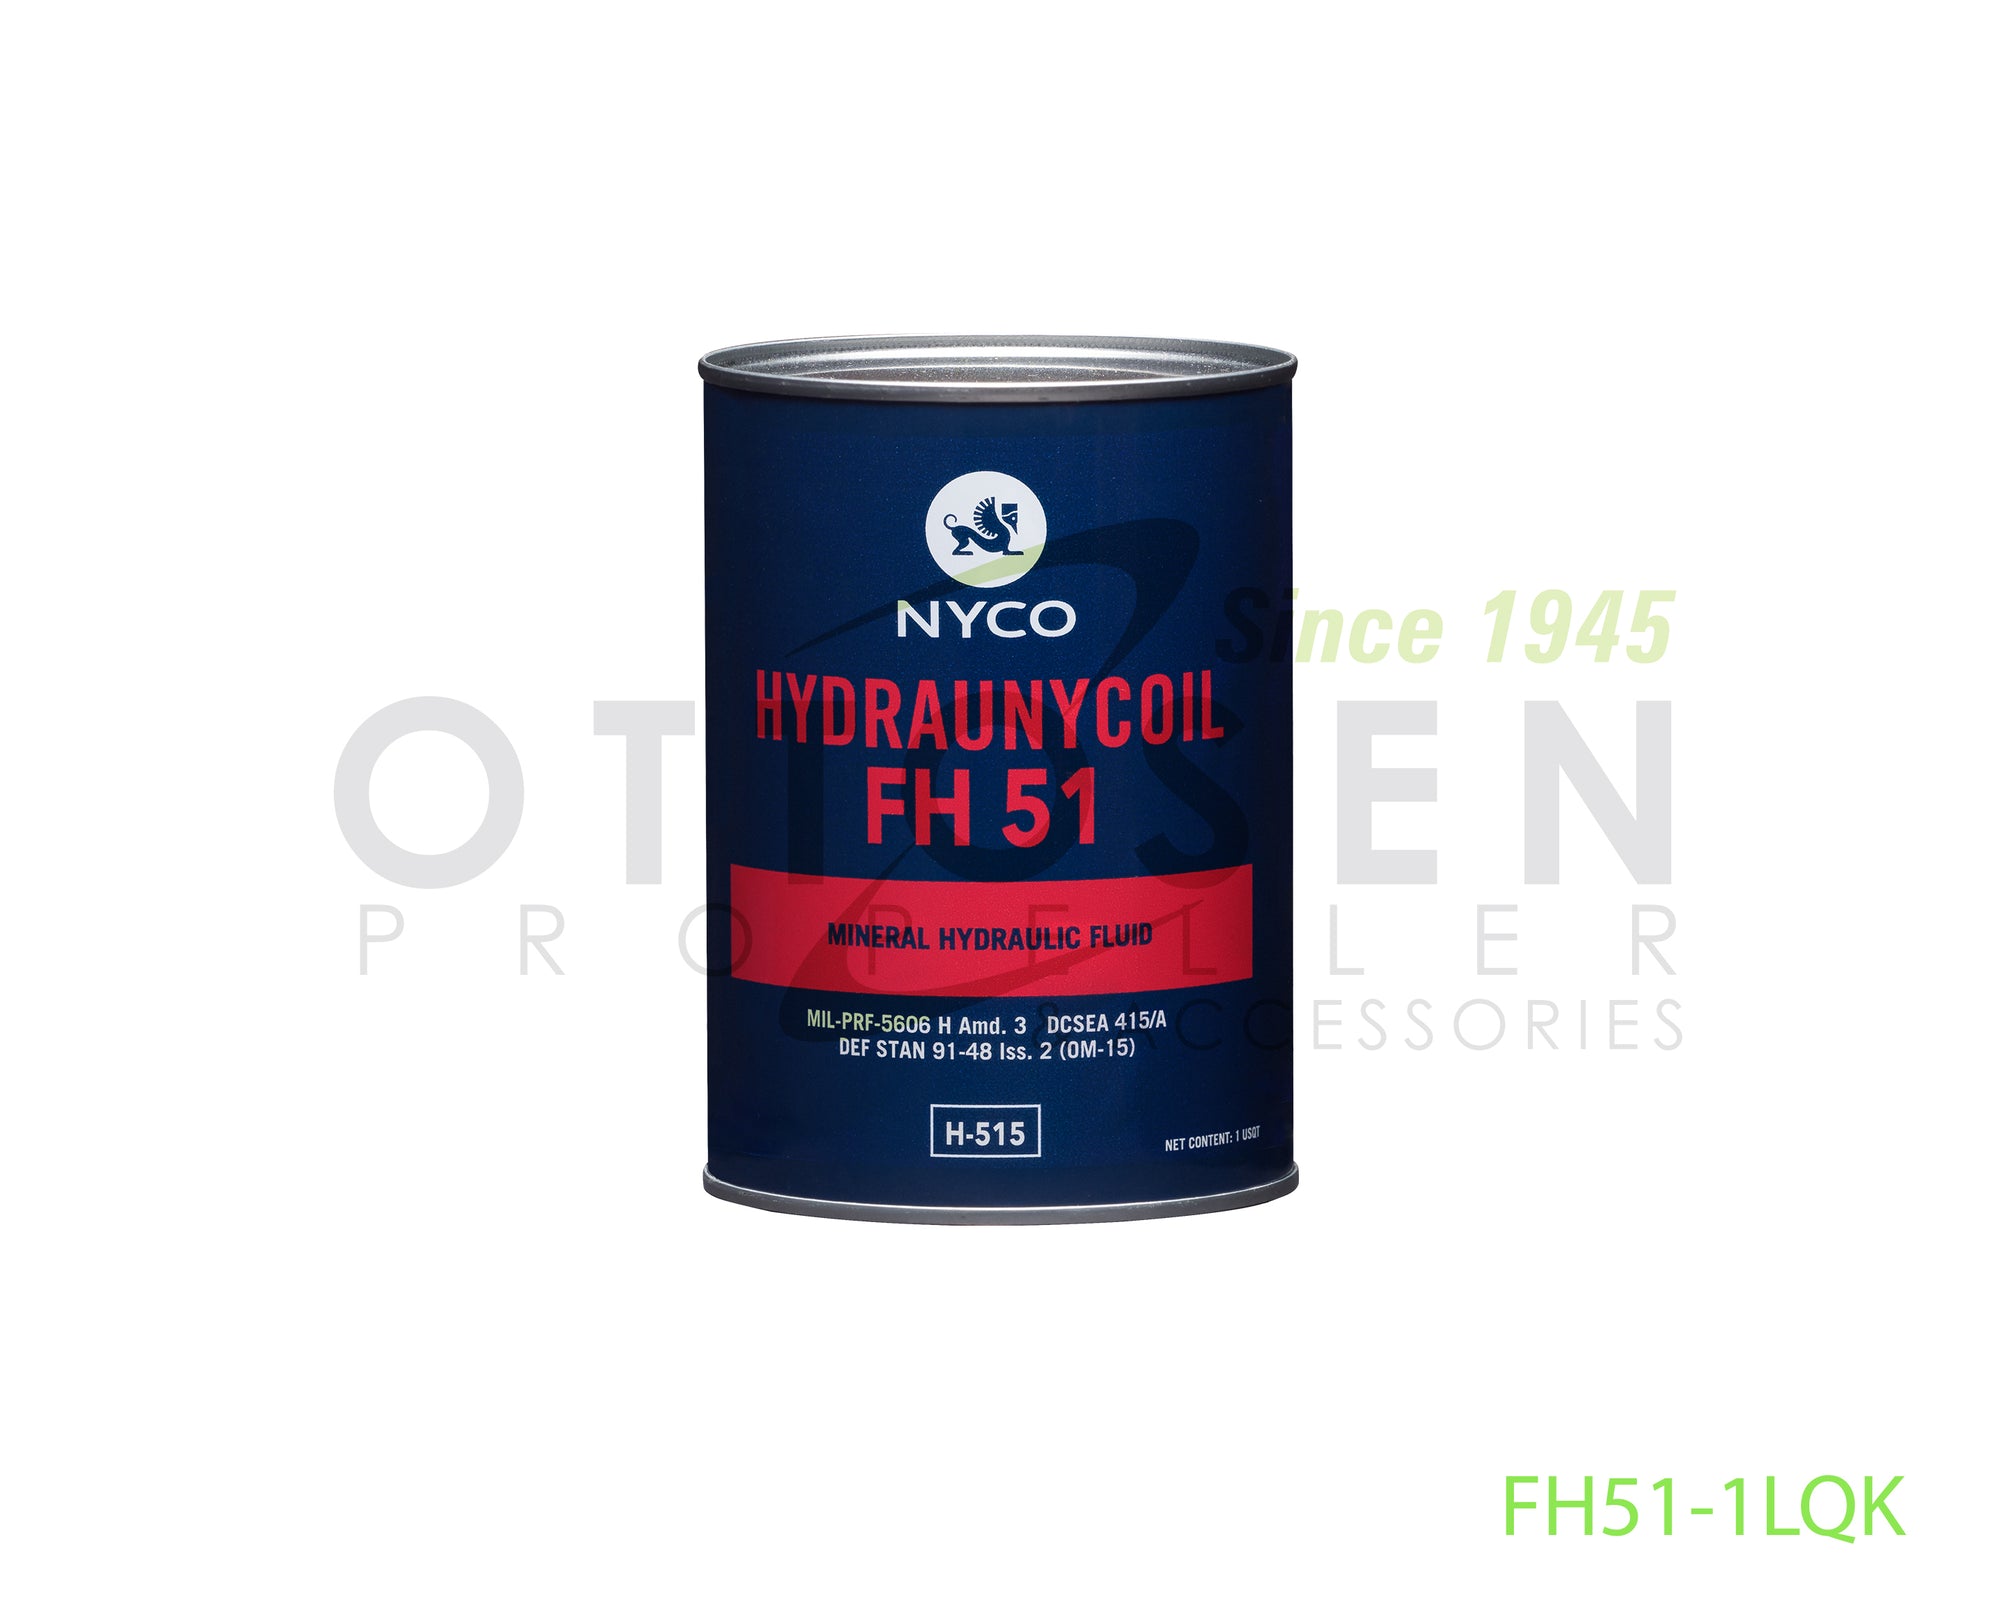 FH51-1LQK-NYCO-HYDRAULIC-FLUID-PICTURE-1